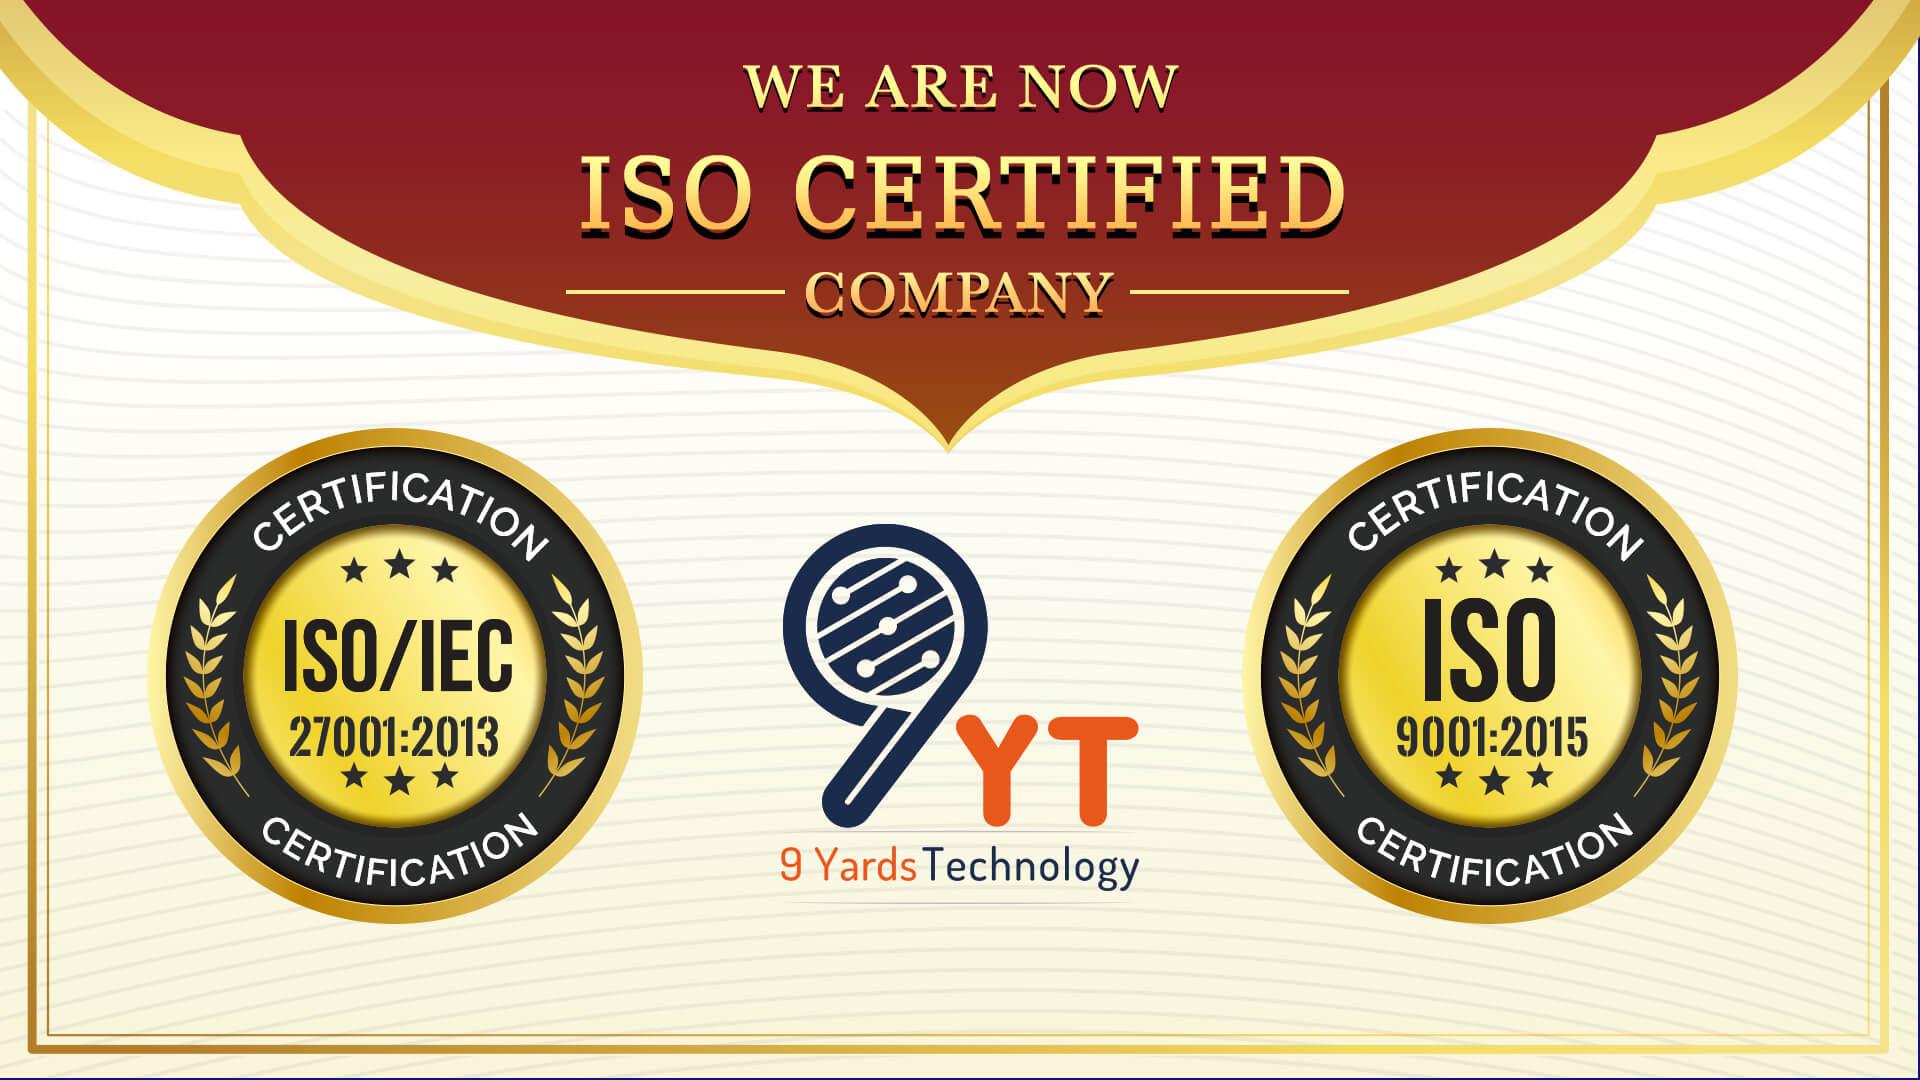 9 Yards Technology Advances With ISO 9001:2015 And ISO/IEC 27001:2013 Certifications!